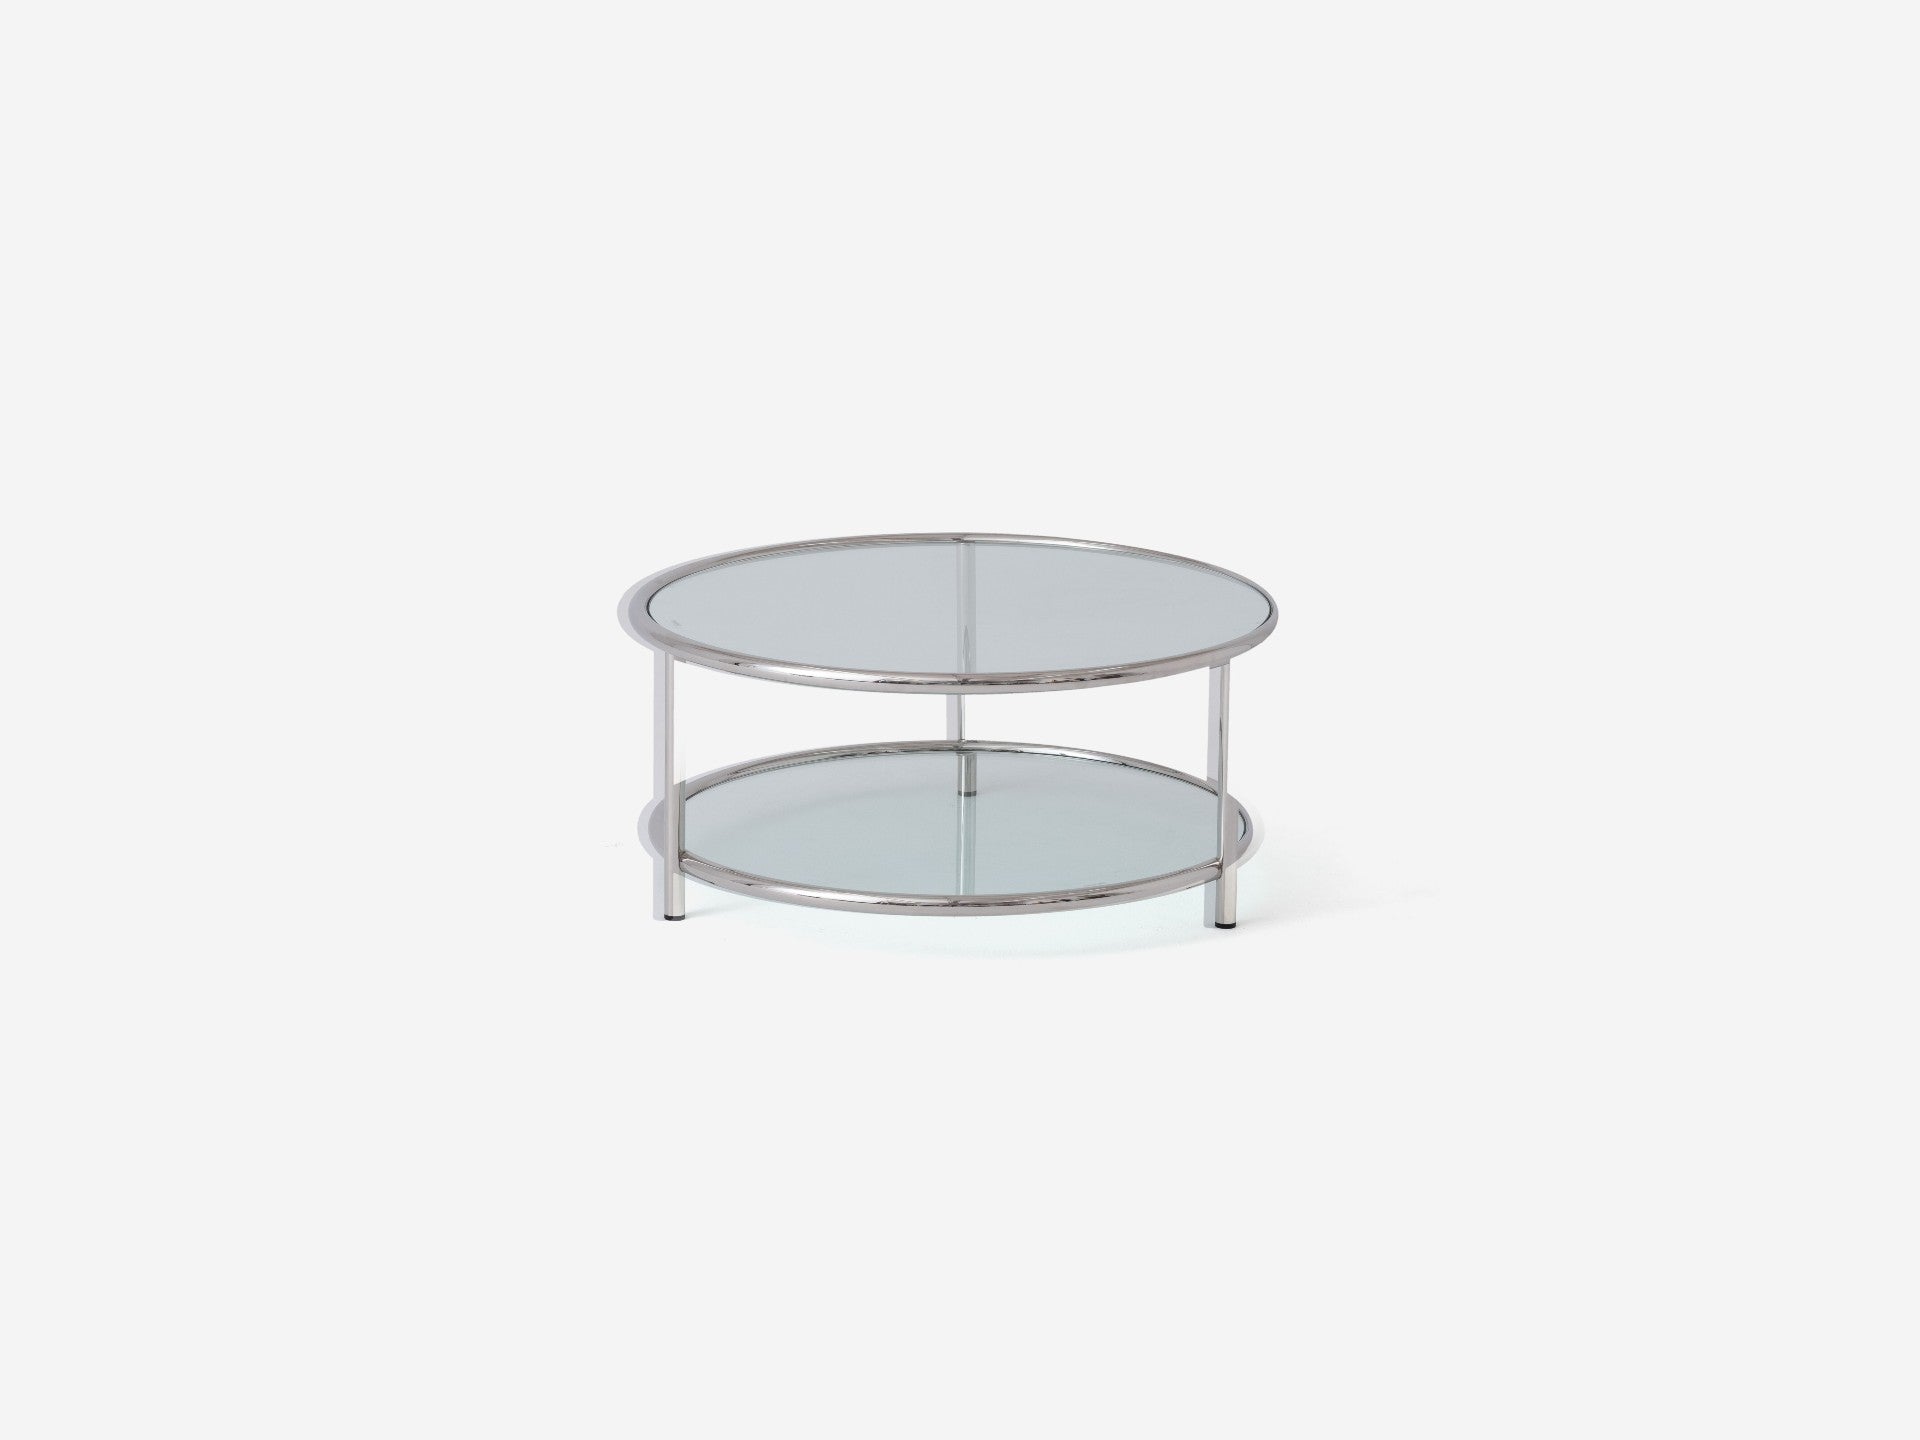 Fun, versatile, and perfect for small-space living, the Tubular tables feature steel frames with glass tabletops. The Tubular coffee table is available in two sizes: round or oval. Choose from a black frame with grey glass or stainless steel frame with clear glass.